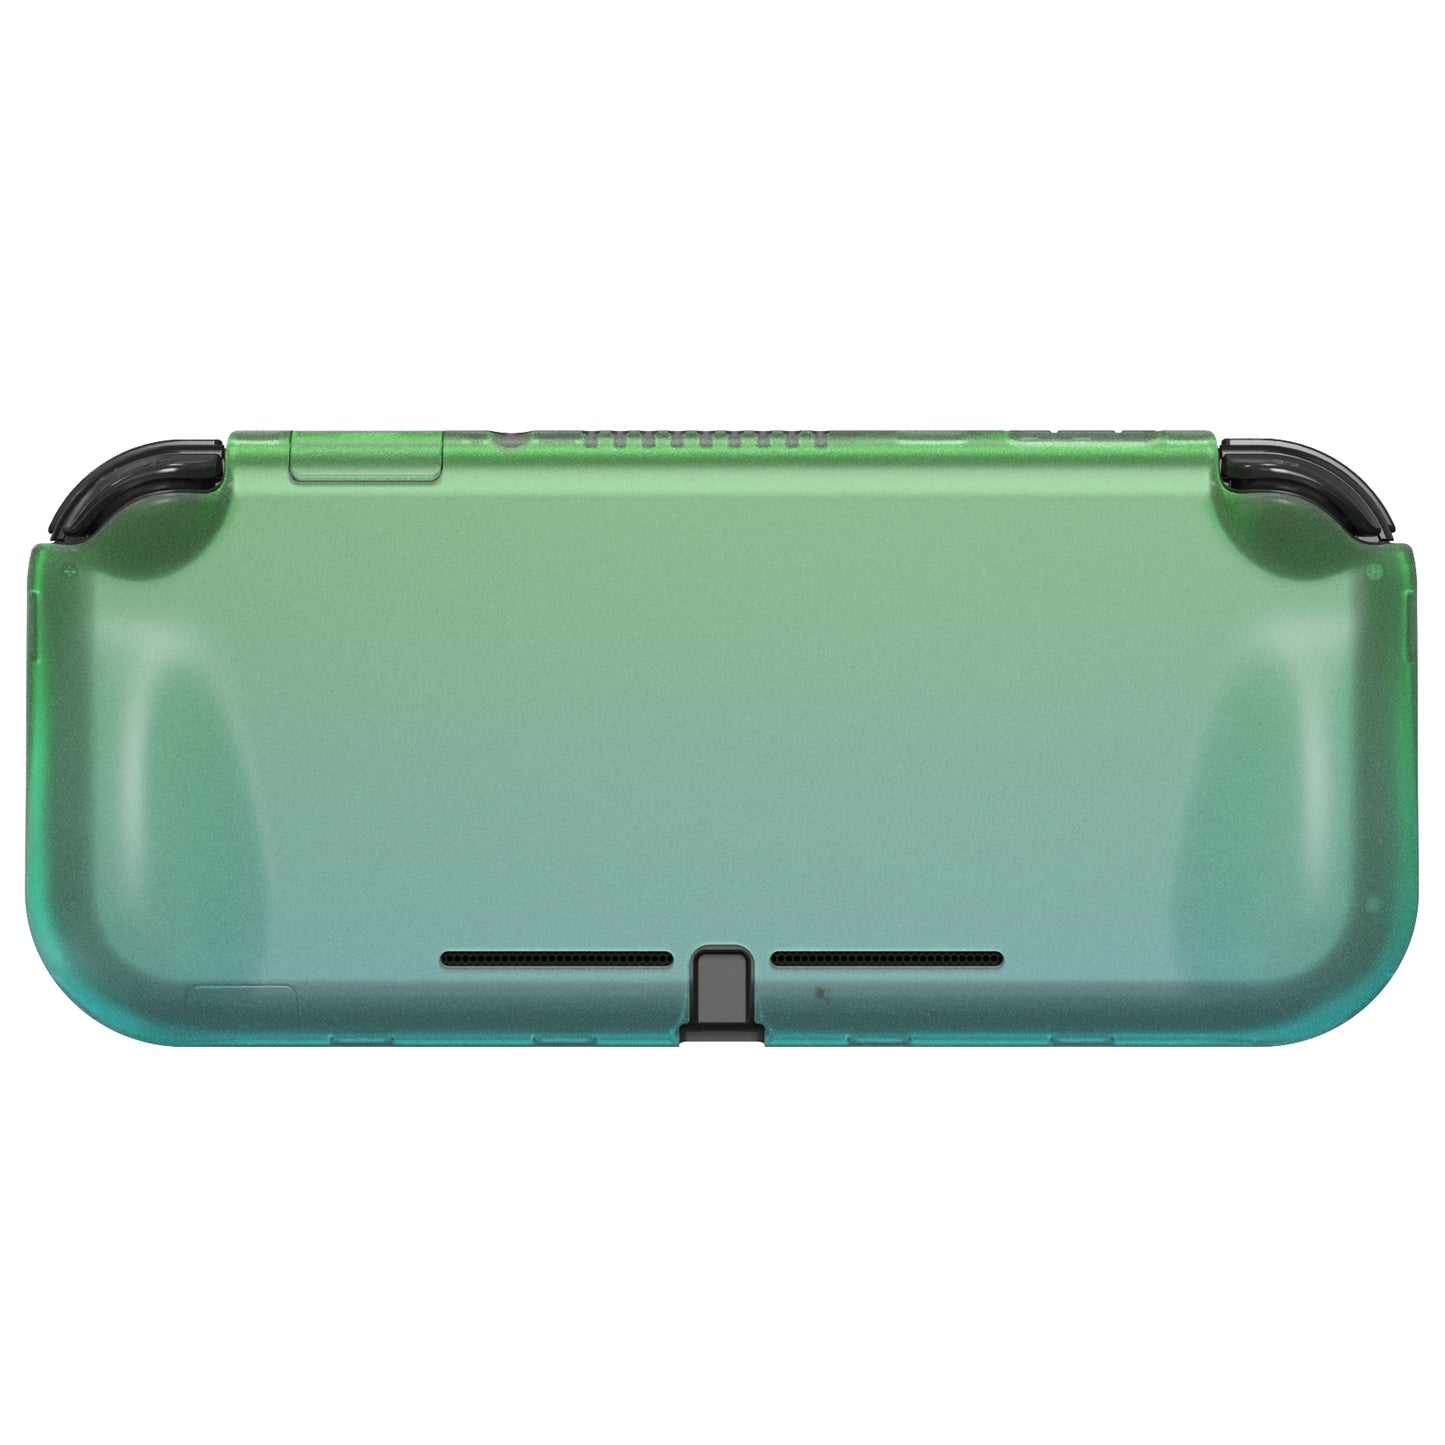 PlayVital ZealProtect Protective Case for Nintendo Switch Lite, Hard Shell Ergonomic Grip Cover for Nintendo Switch Lite w/Screen Protector & Thumb Grip Caps & Button Caps - Gradient Translucent Green Blue - PSLYP3013 playvital